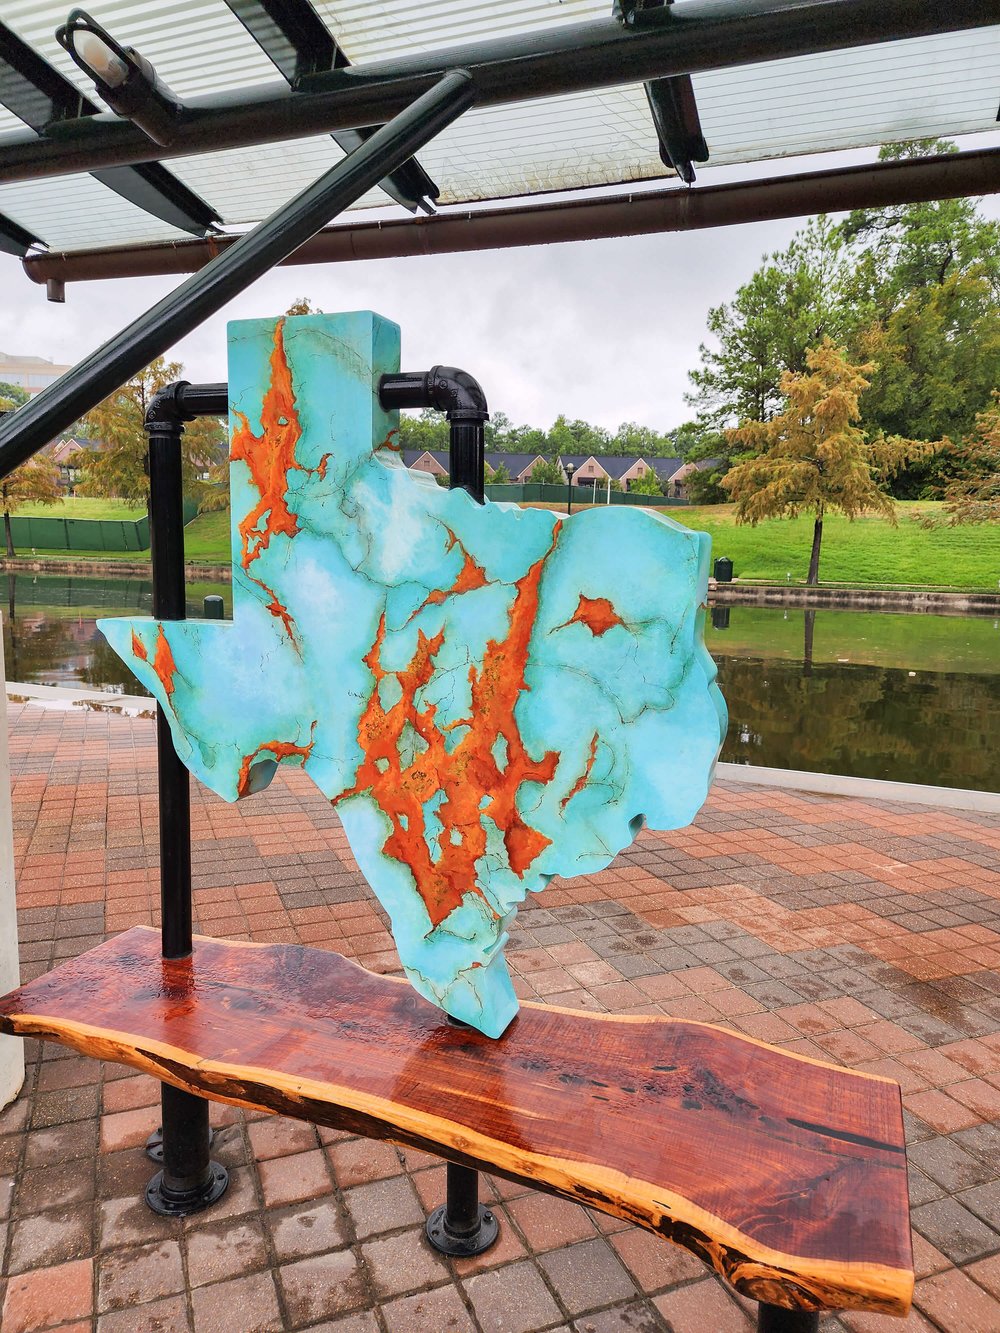 Texas Art Bench in The Woodlands